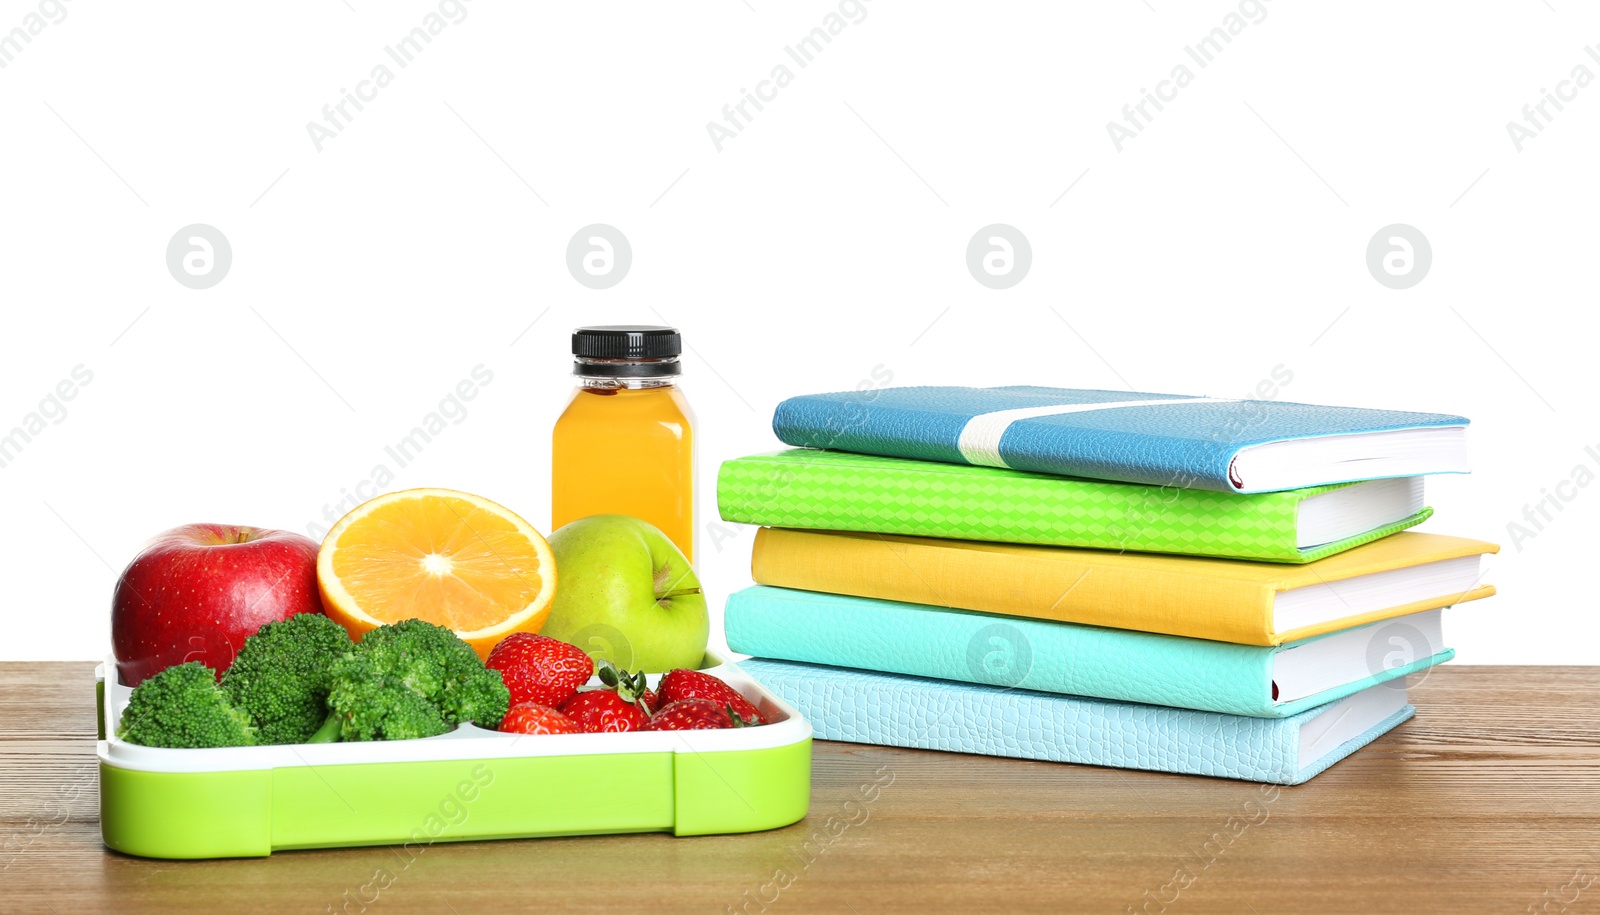 Photo of Tray with healthy food and notebooks on table against white background. School lunch